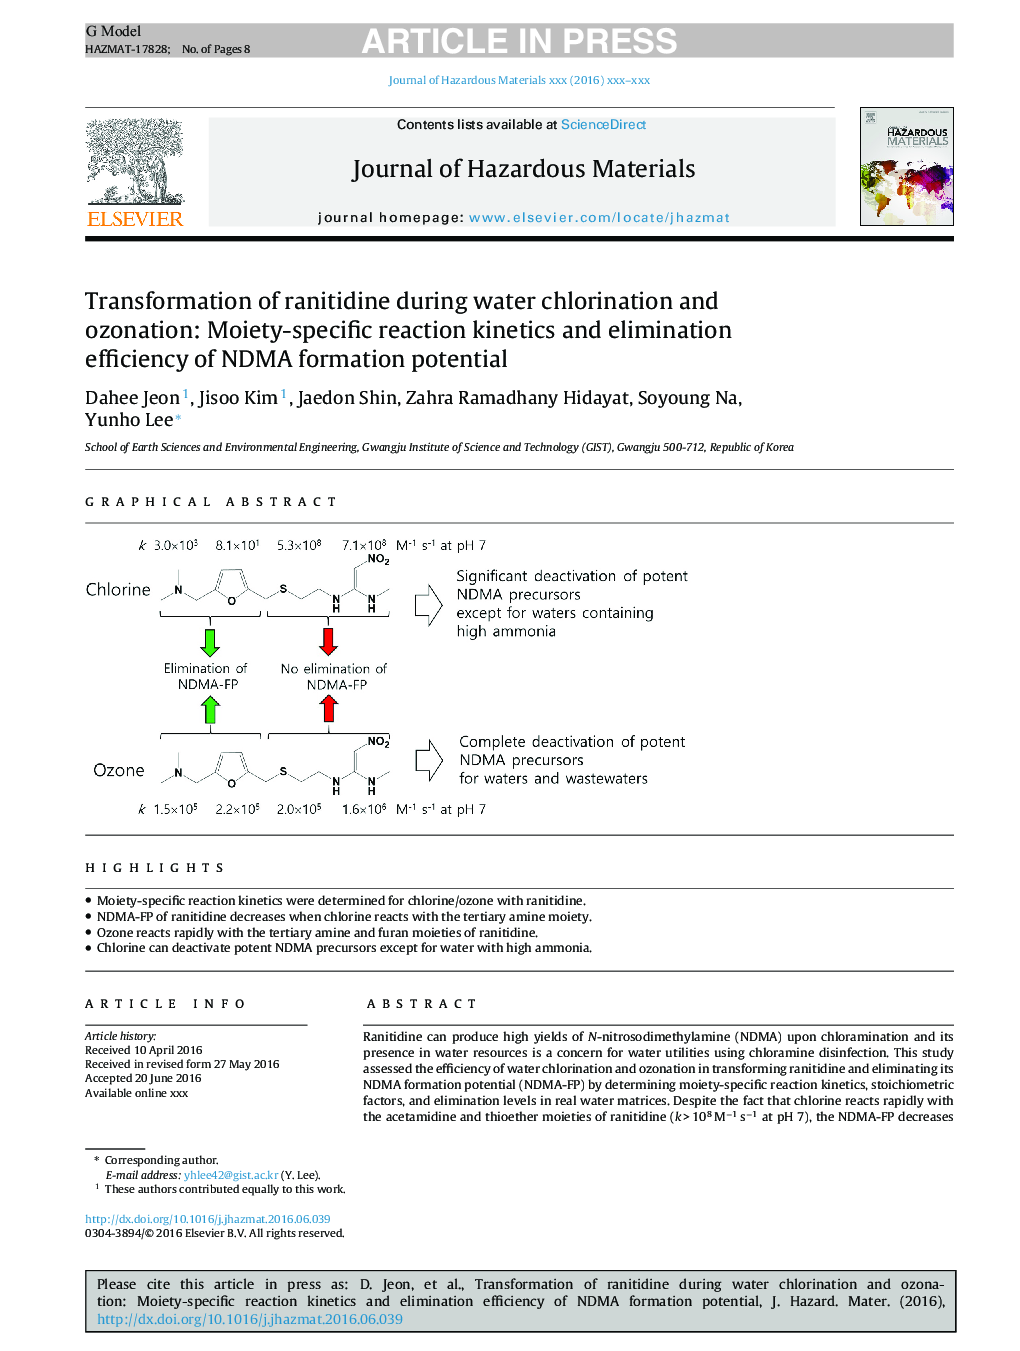 Transformation of ranitidine during water chlorination and ozonation: Moiety-specific reaction kinetics and elimination efficiency of NDMA formation potential